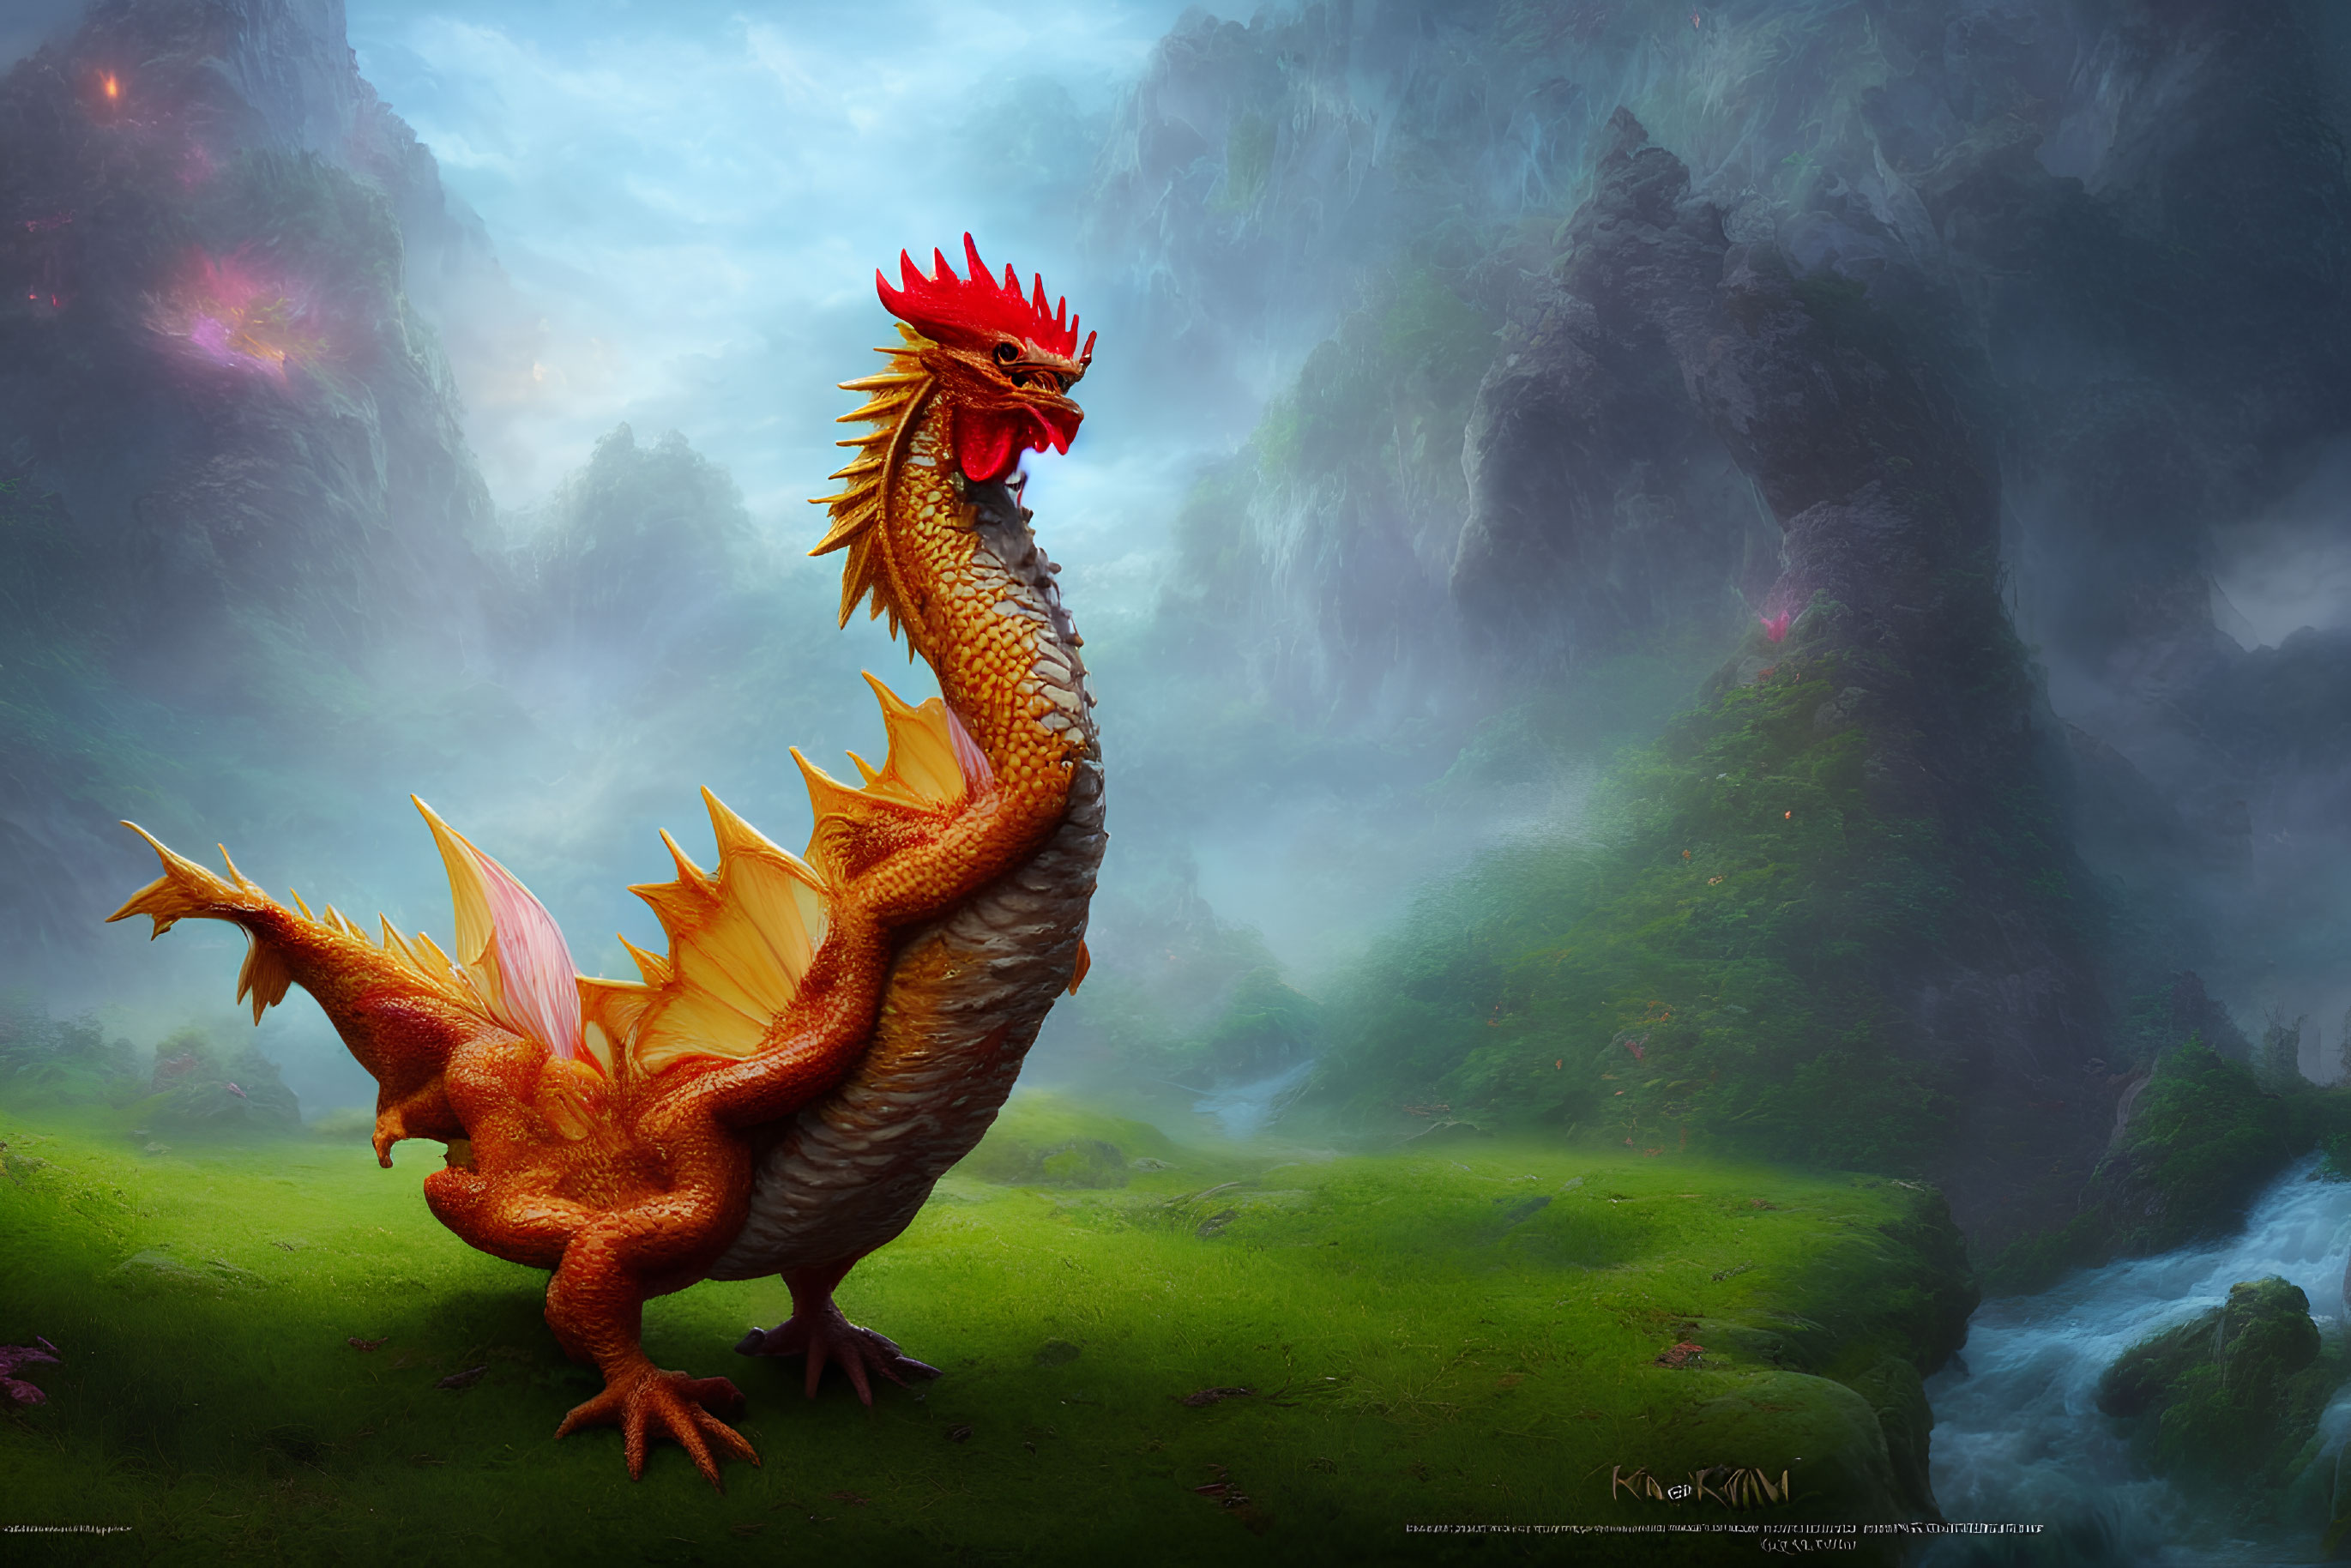 Mythical dragon with rooster head in misty mountain landscape